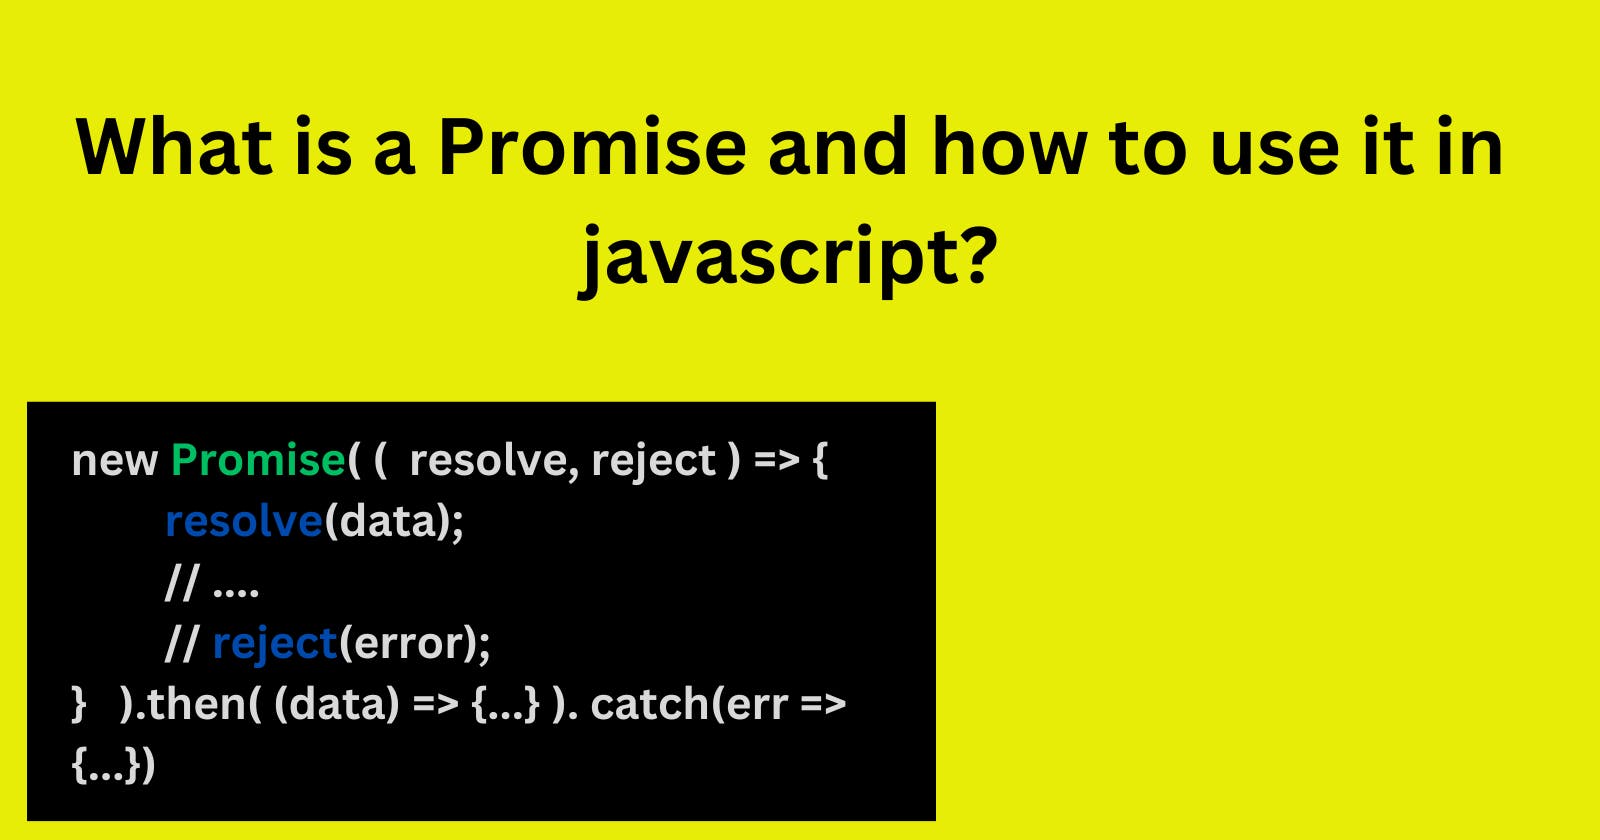 What is a Promise and how to use it in javascript?